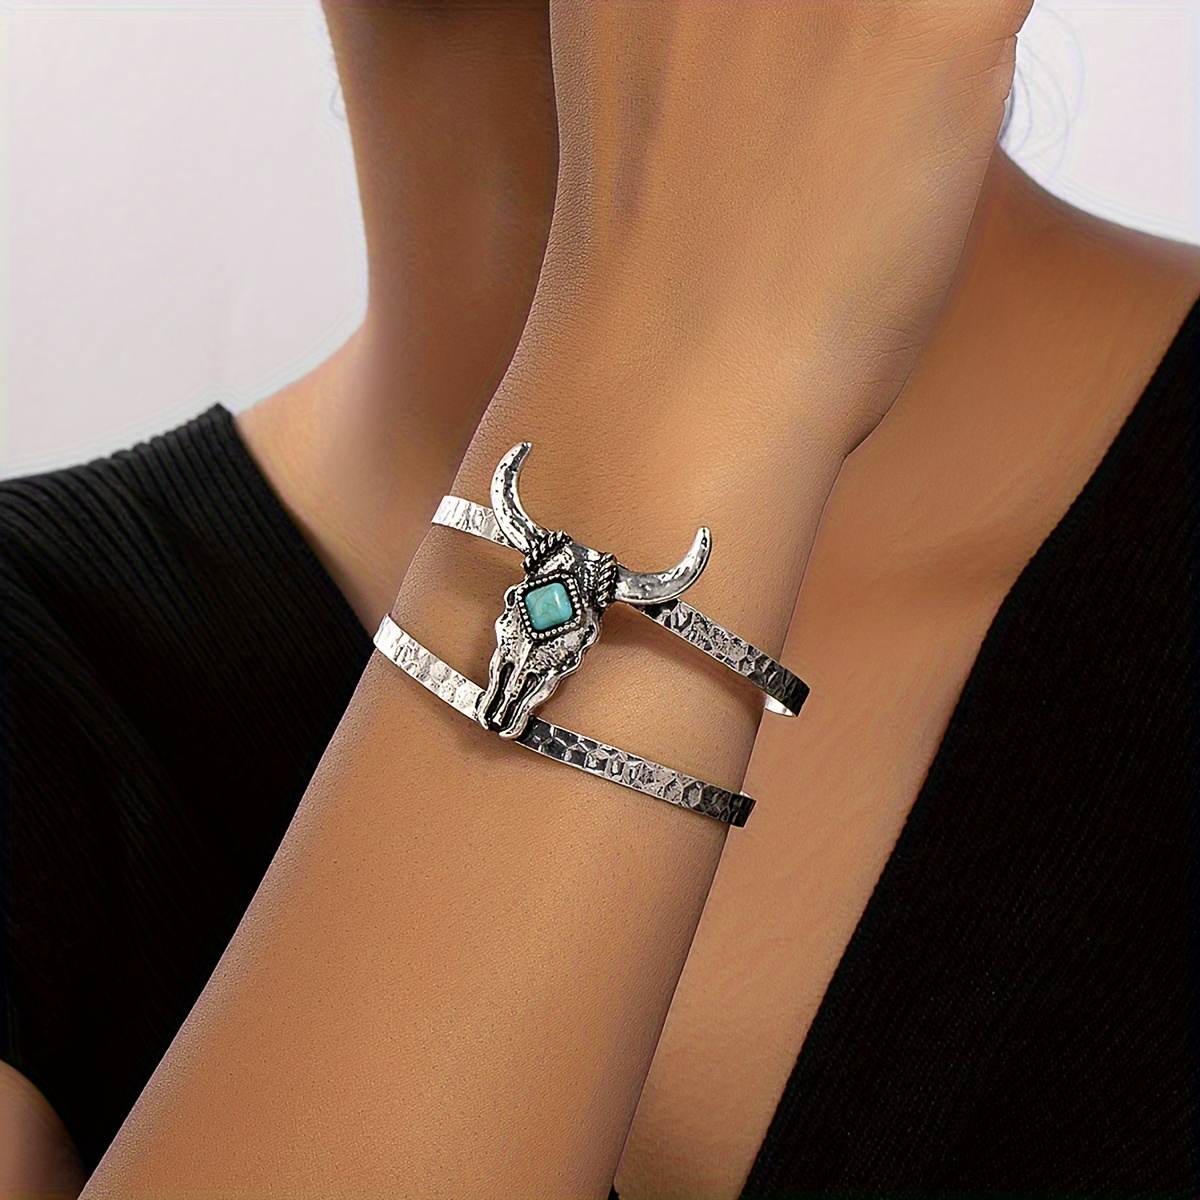 

Western Cow Cattle Head Turquoise Decor Cuff Bangle Bracelet For Women Jewelry Gift